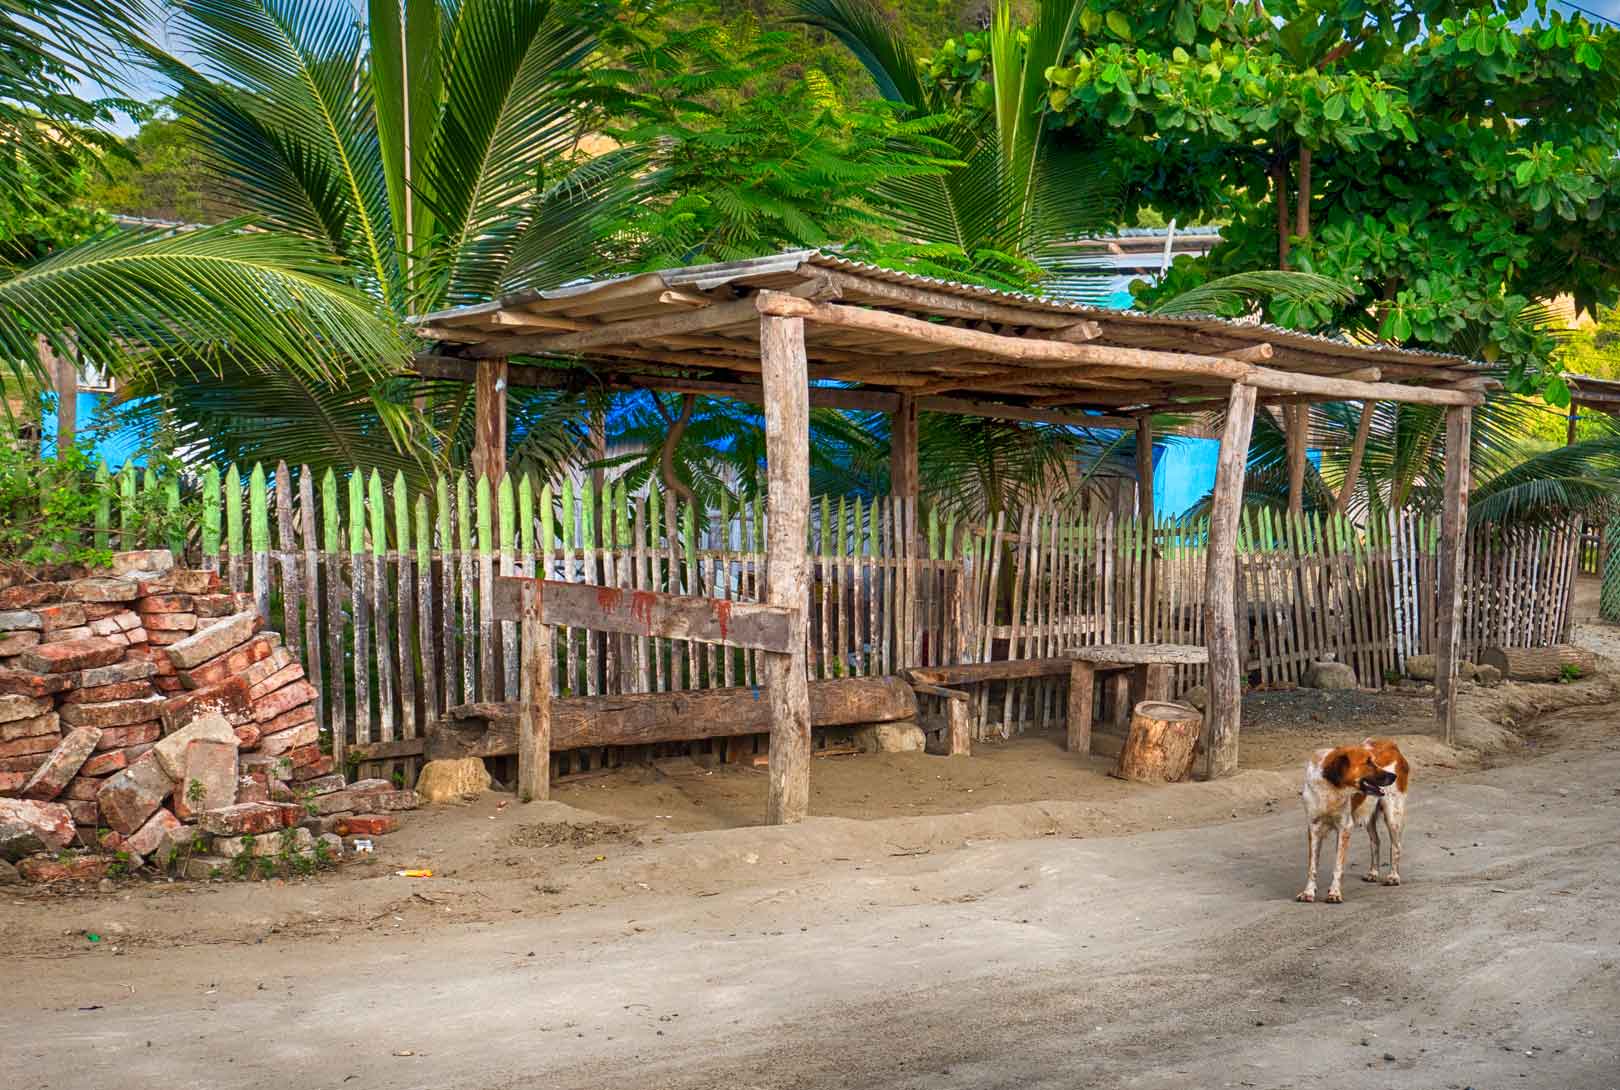 A Stray Dog On A Dirt Road In The Small Town Of Canoa